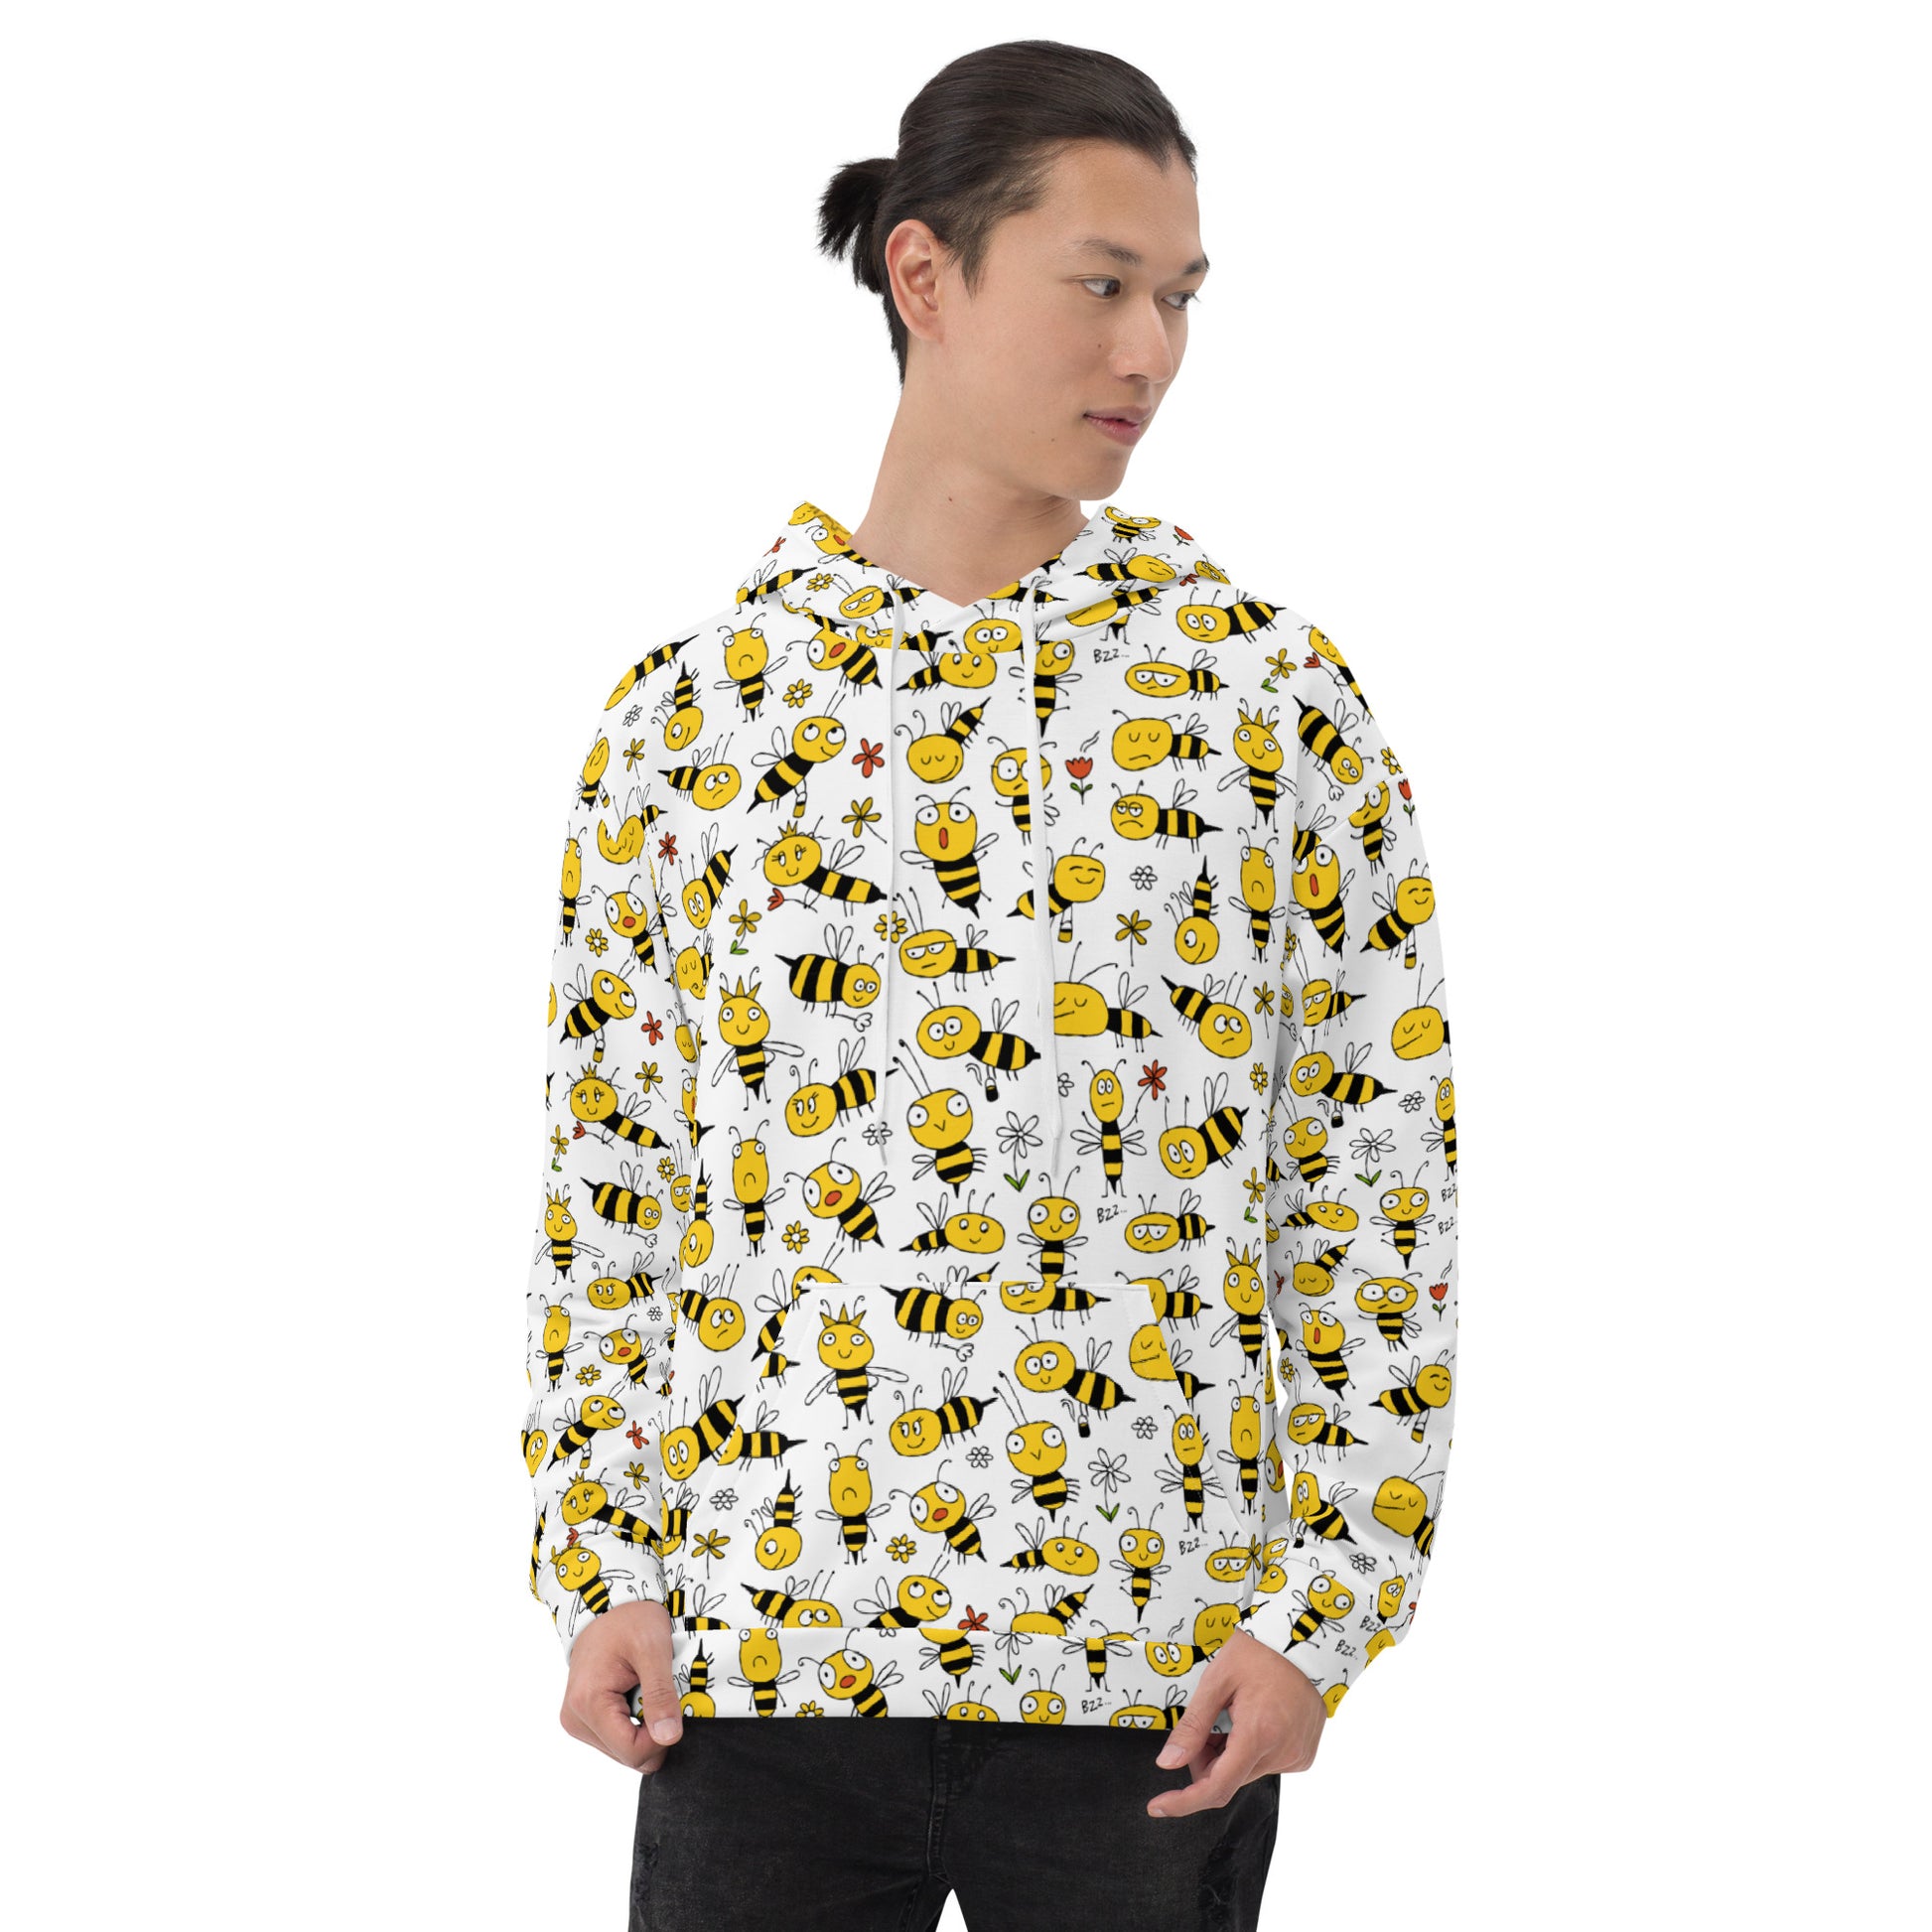 Boy in Unisex Hoodie white with funny yellow bees family.